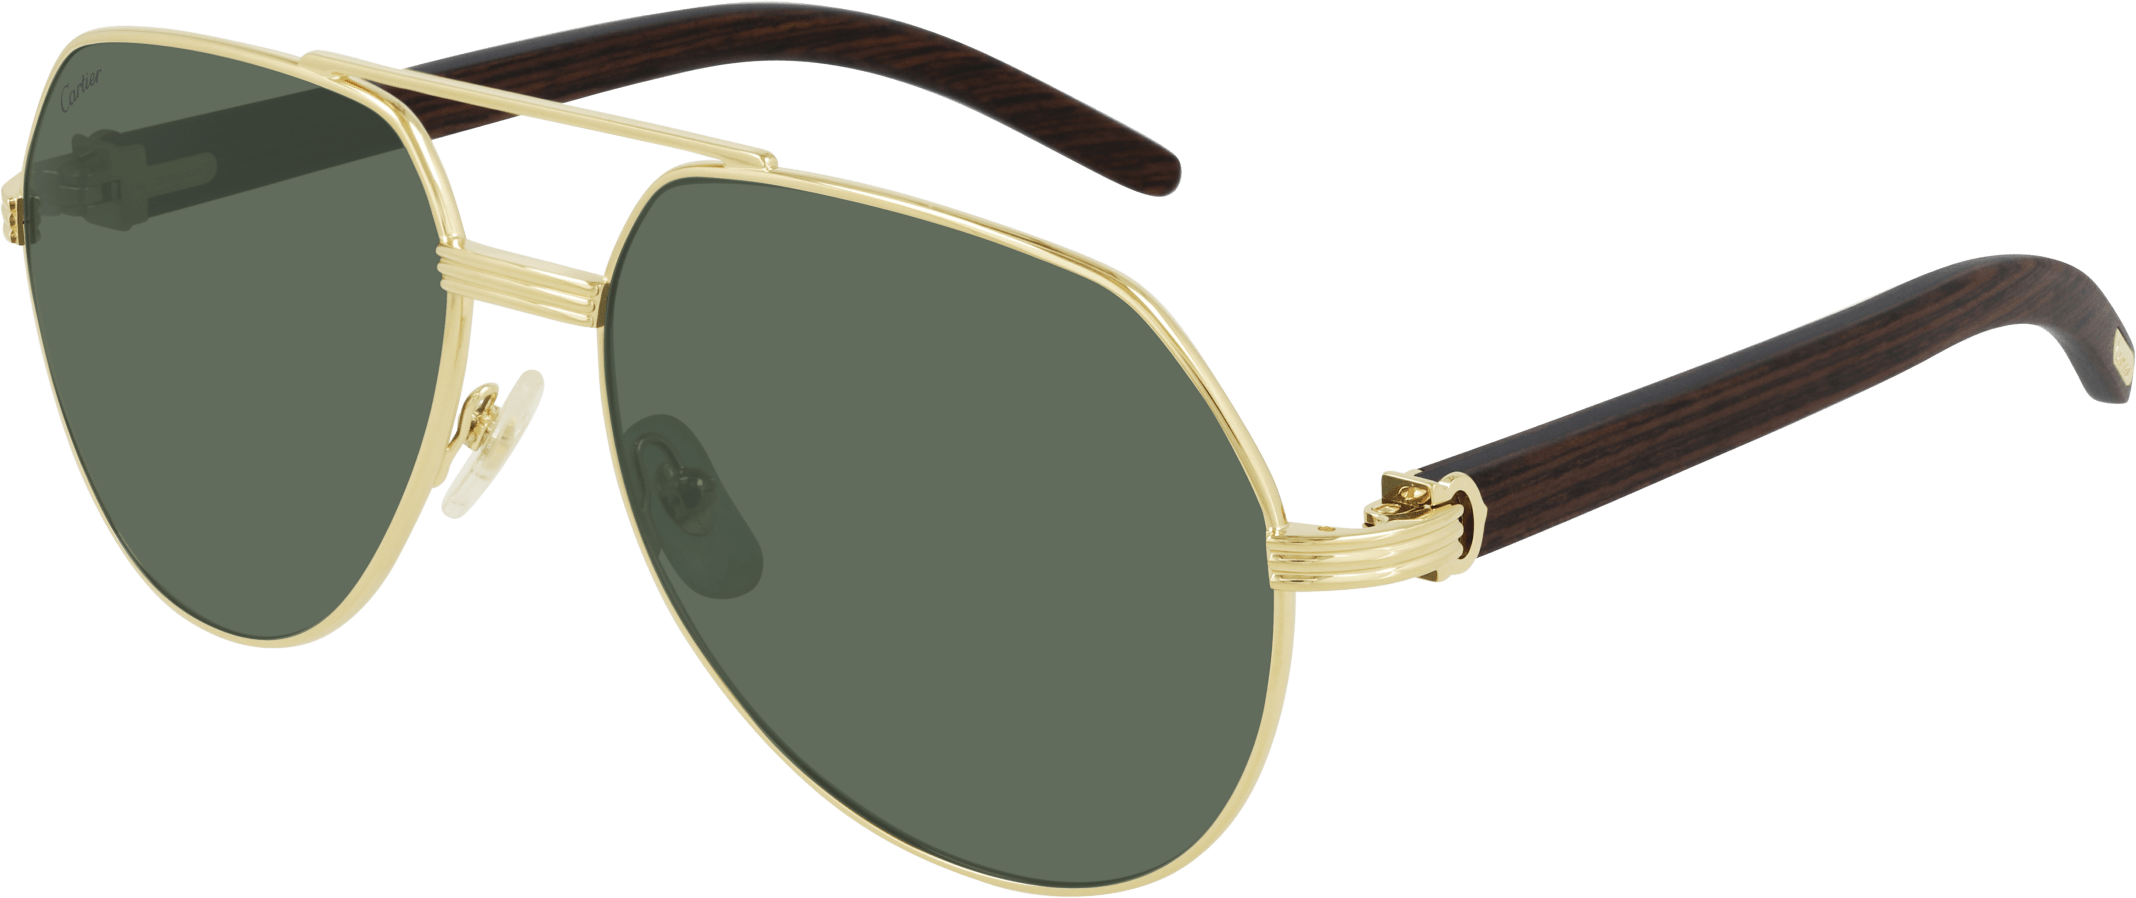 Color_CT0272S-002 - GOLD - GREEN - AR (ANTI REFLECTIVE) - POLARIZED